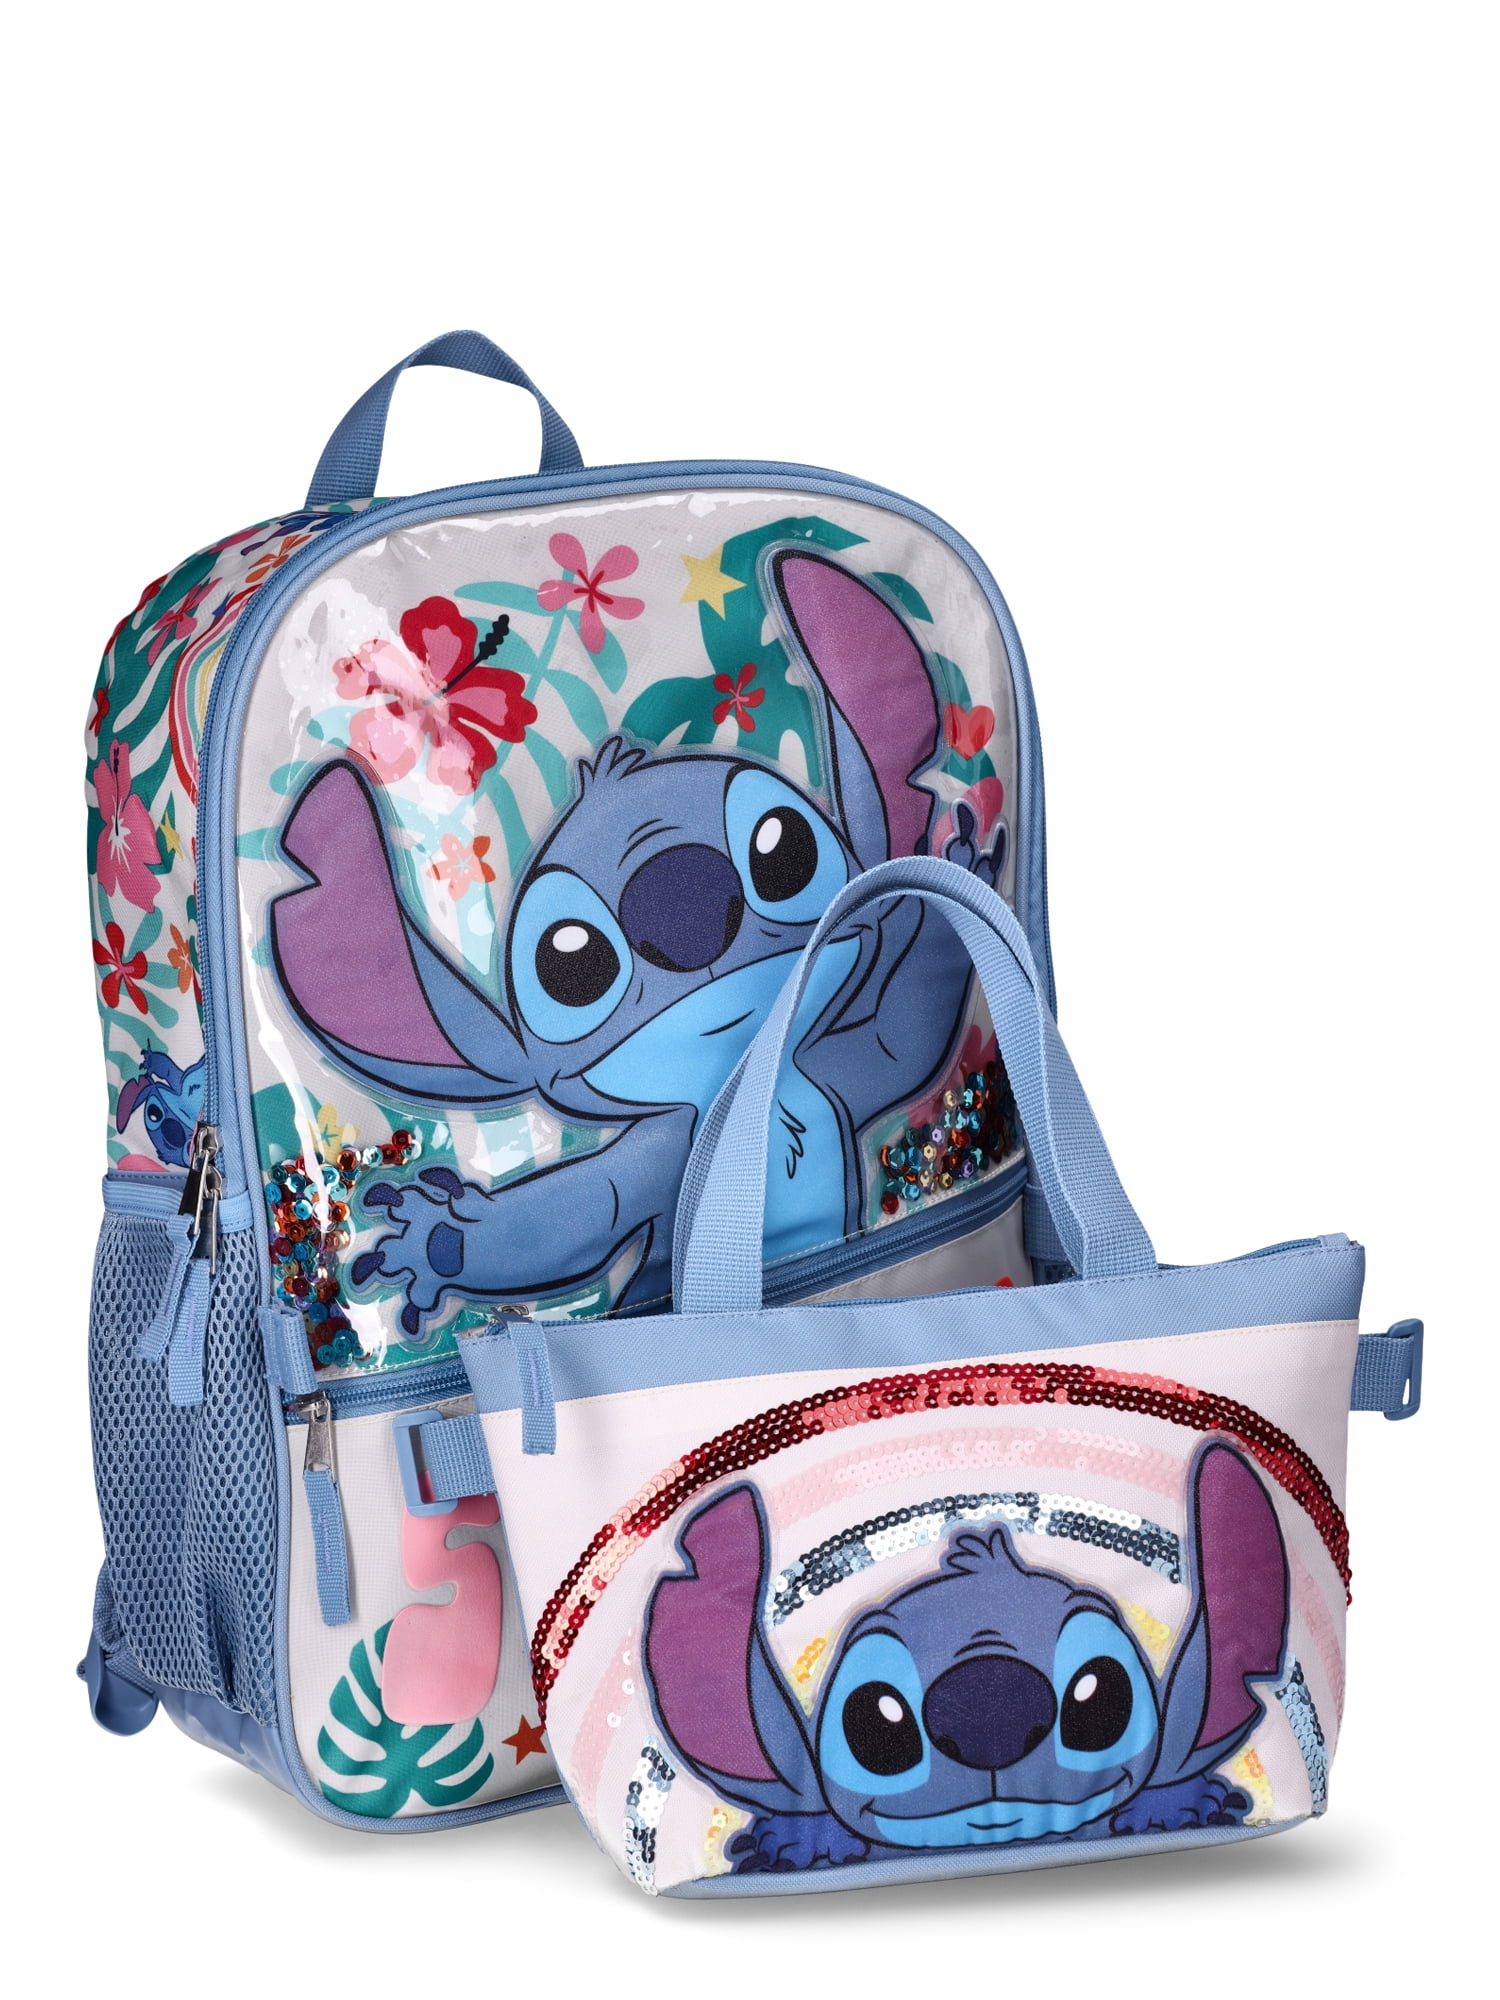 Stitch Gifts Lilo and Stitch Bag Lilo & Stitch Pastel Baby Blue Hand Bag w/ Matching Adjustable Shoulder Strap & Free Matching Gift for New Customers